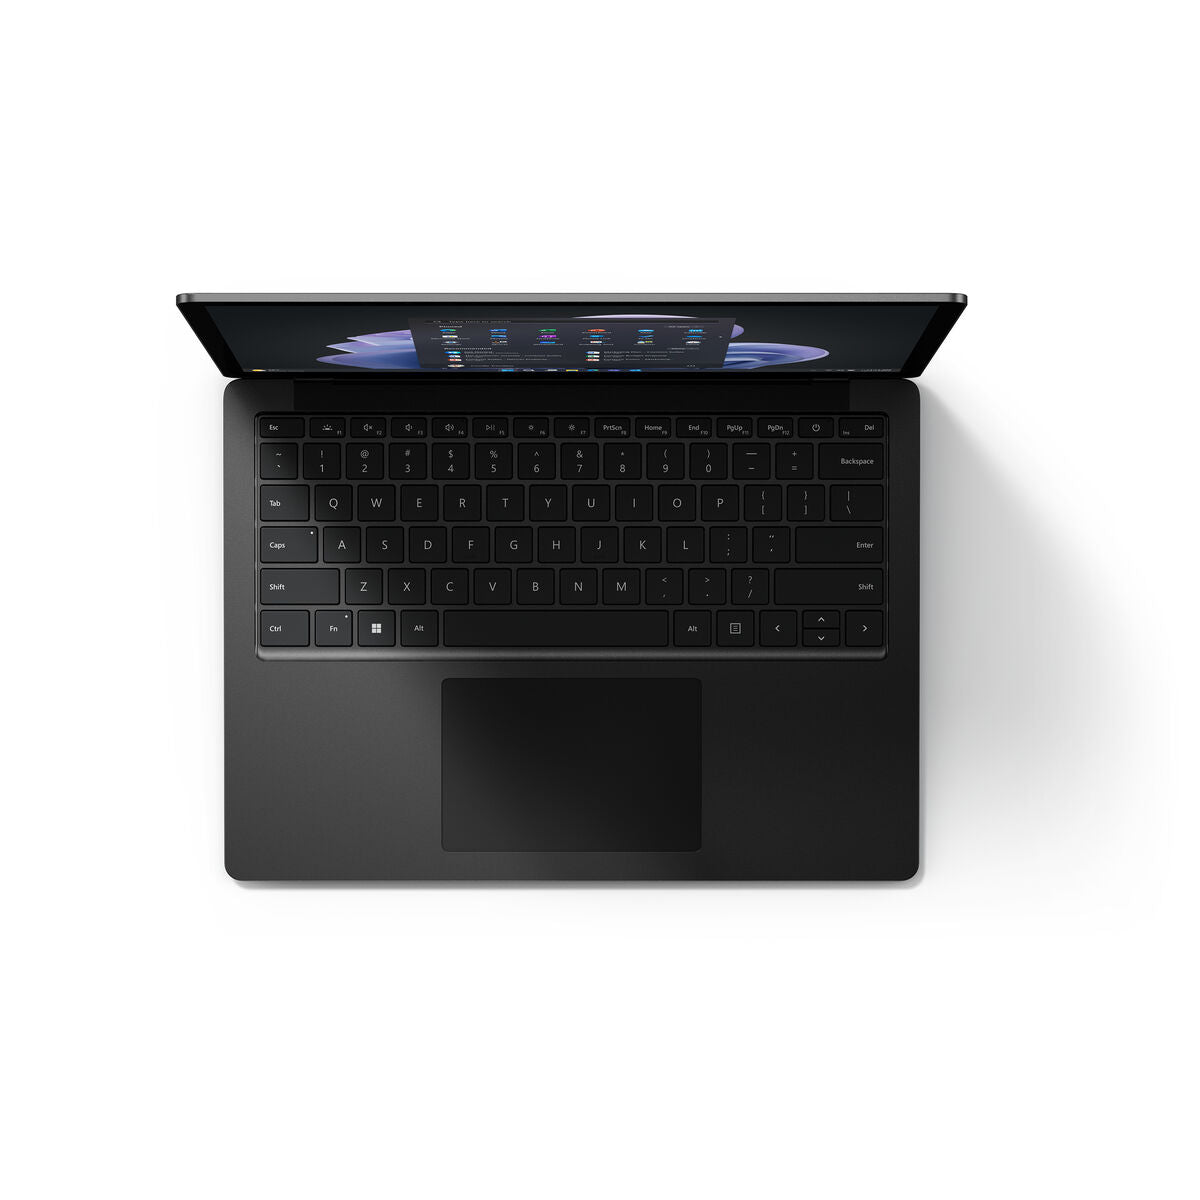 Laptop Microsoft Surface Laptop 5 Spanish Qwerty 13,5" i5-1245U Intel Corre i5-1245U 8 GB RAM 256 GB 256 GB SSD QWERTY, Microsoft, Computing, laptop-microsoft-surface-laptop-5-spanish-qwerty-13-5-i5-1245u-intel-corre-i5-1245u-8-gb-ram-256-gb-256-gb-ssd-qwerty, Brand_Microsoft, category-reference-2609, category-reference-2791, category-reference-2797, category-reference-t-19685, Condition_NEW, office, Price_+ 1000, Teleworking, RiotNook